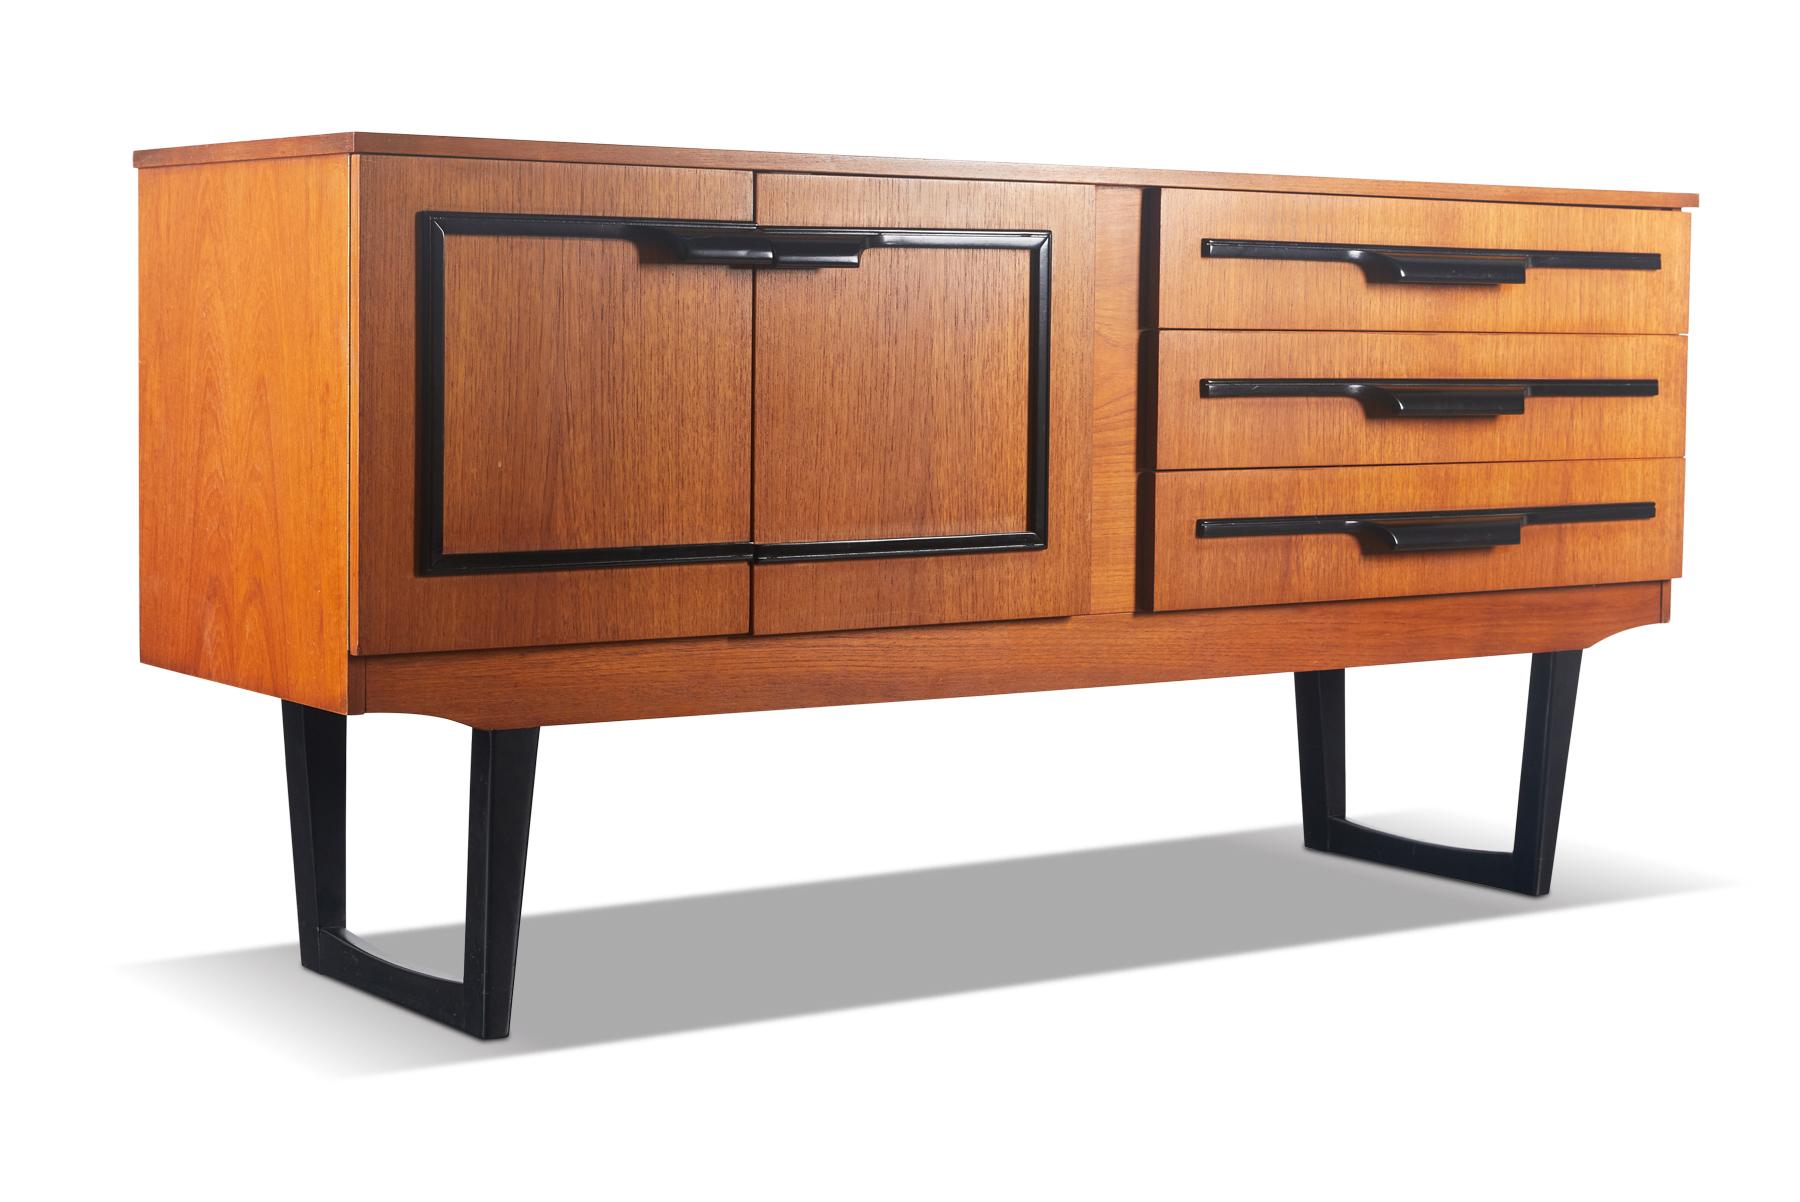 English Modern Midcentury Credenza in Teak with Black Lacquer Accents For Sale 4